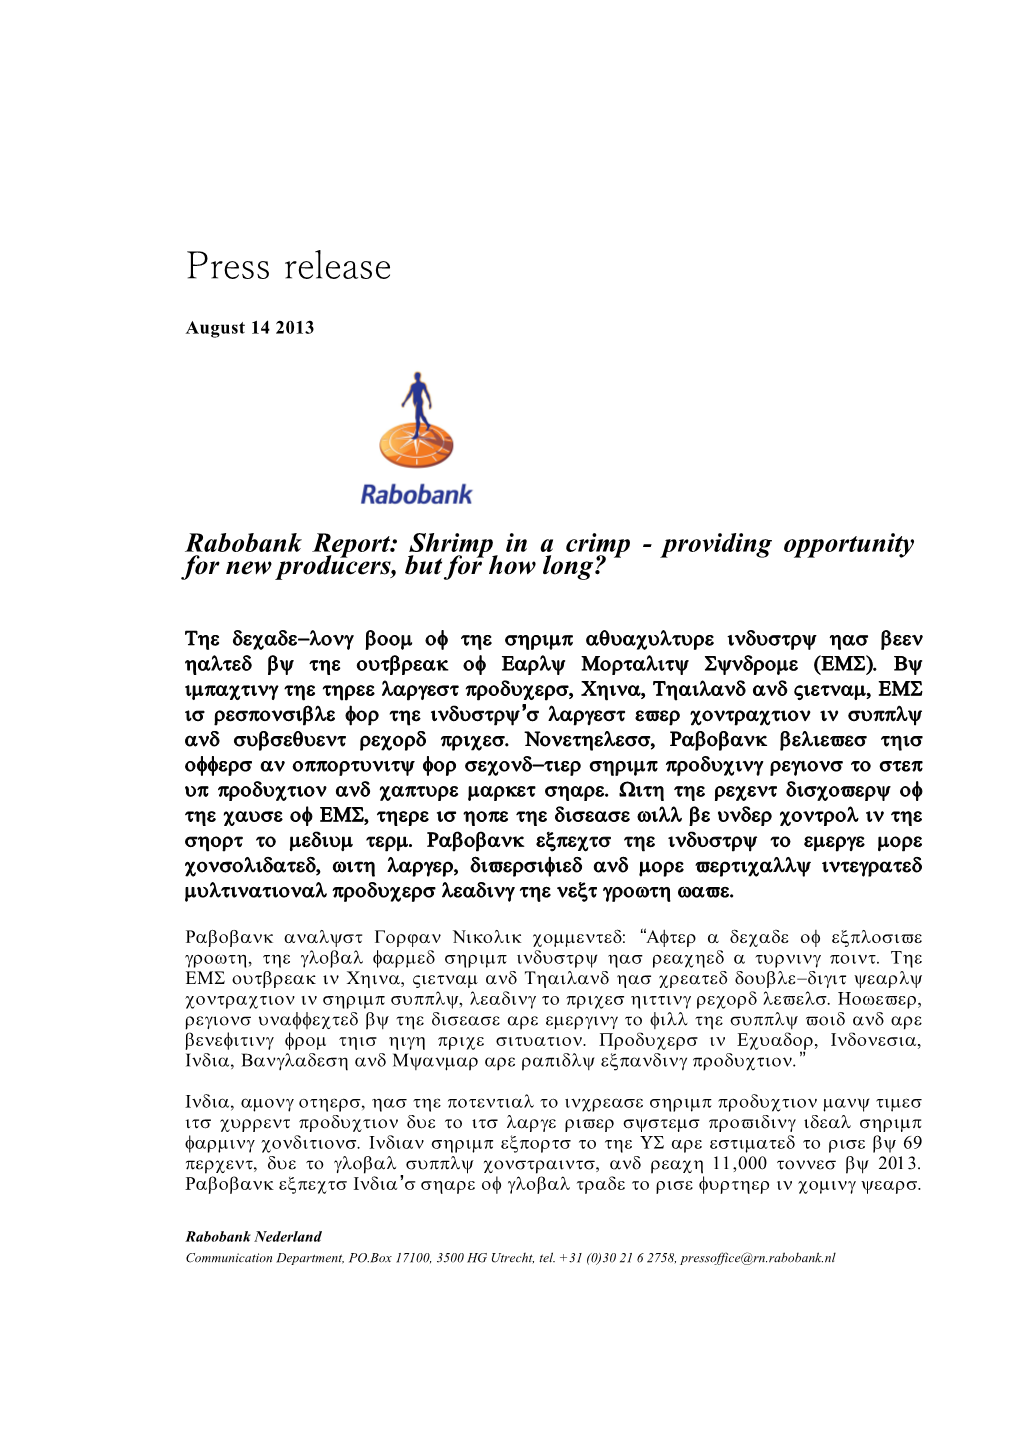 Rabobank Report: Shrimp in a Crimp - Providing Opportunity for New Producers, but for How Long?